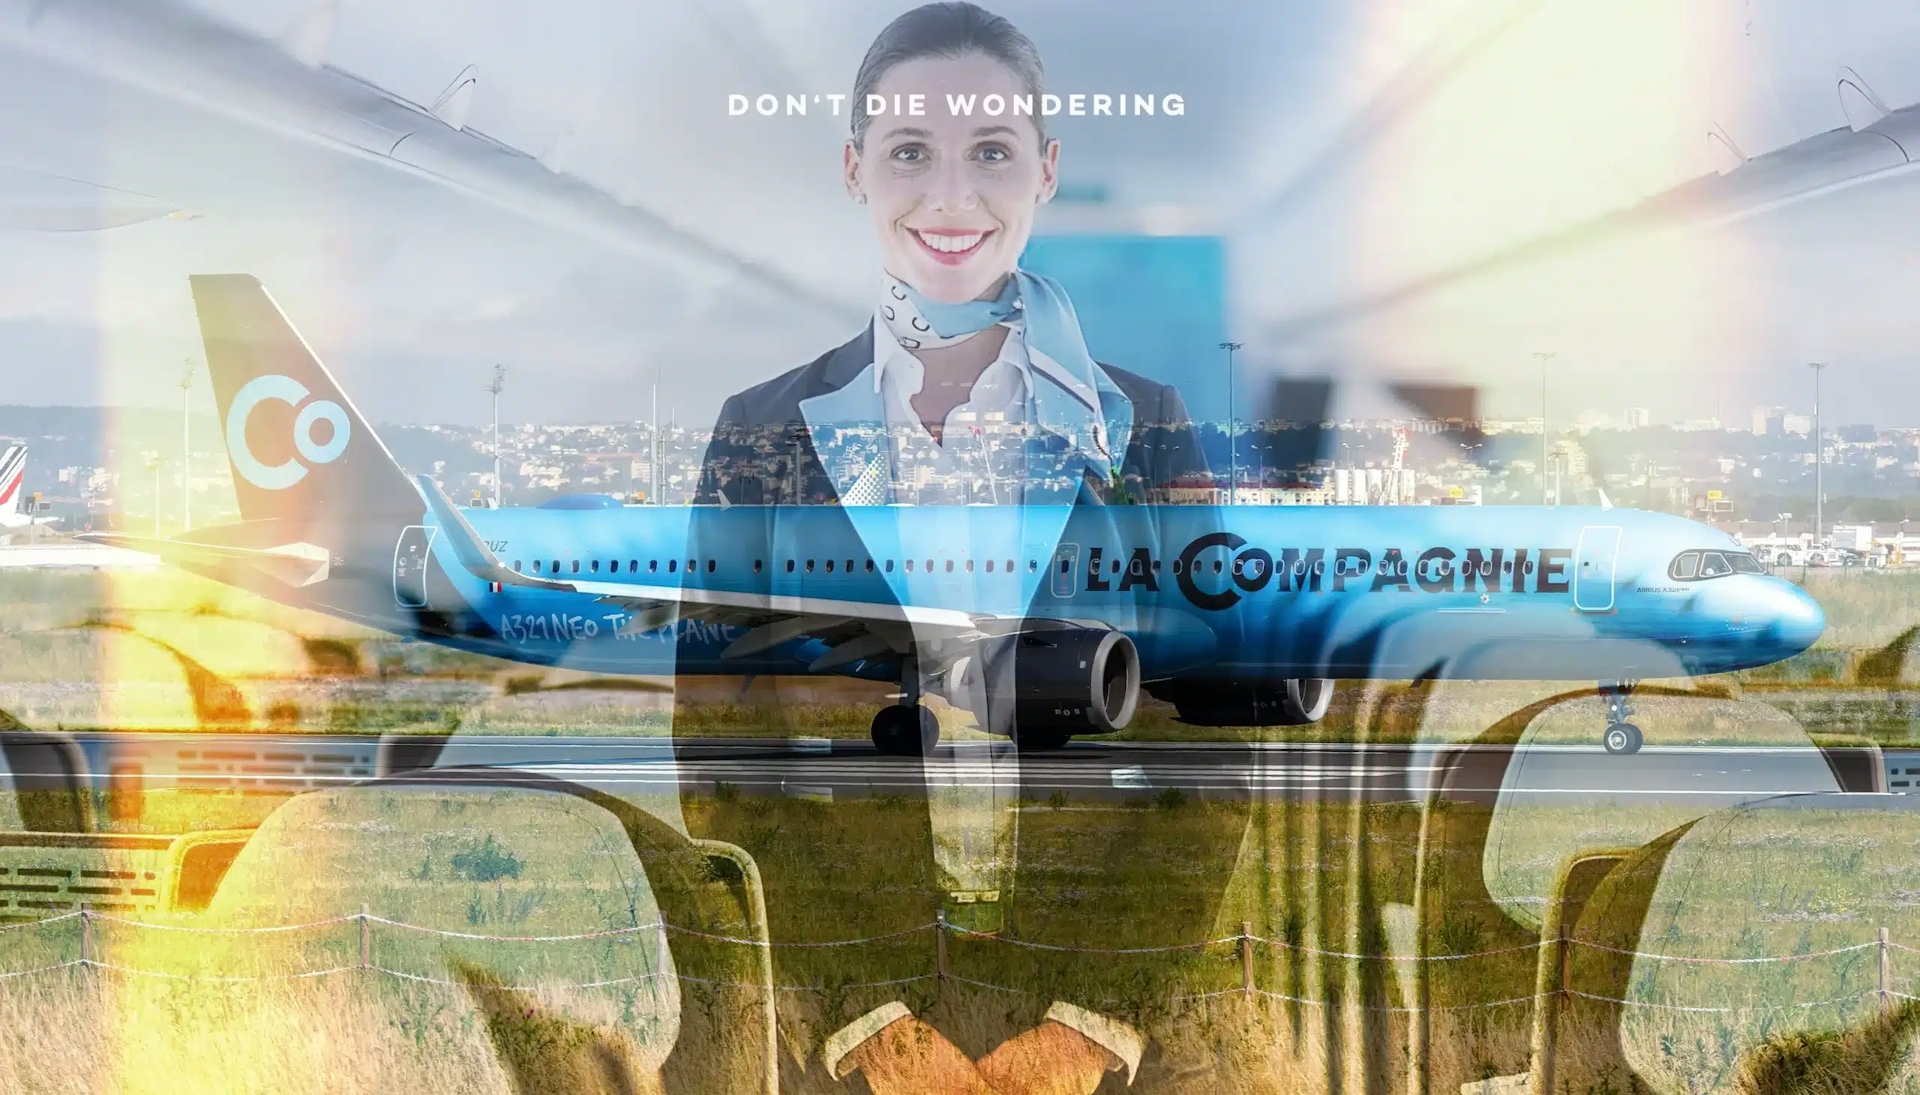 La Compagnie: The Business Class Only Airline